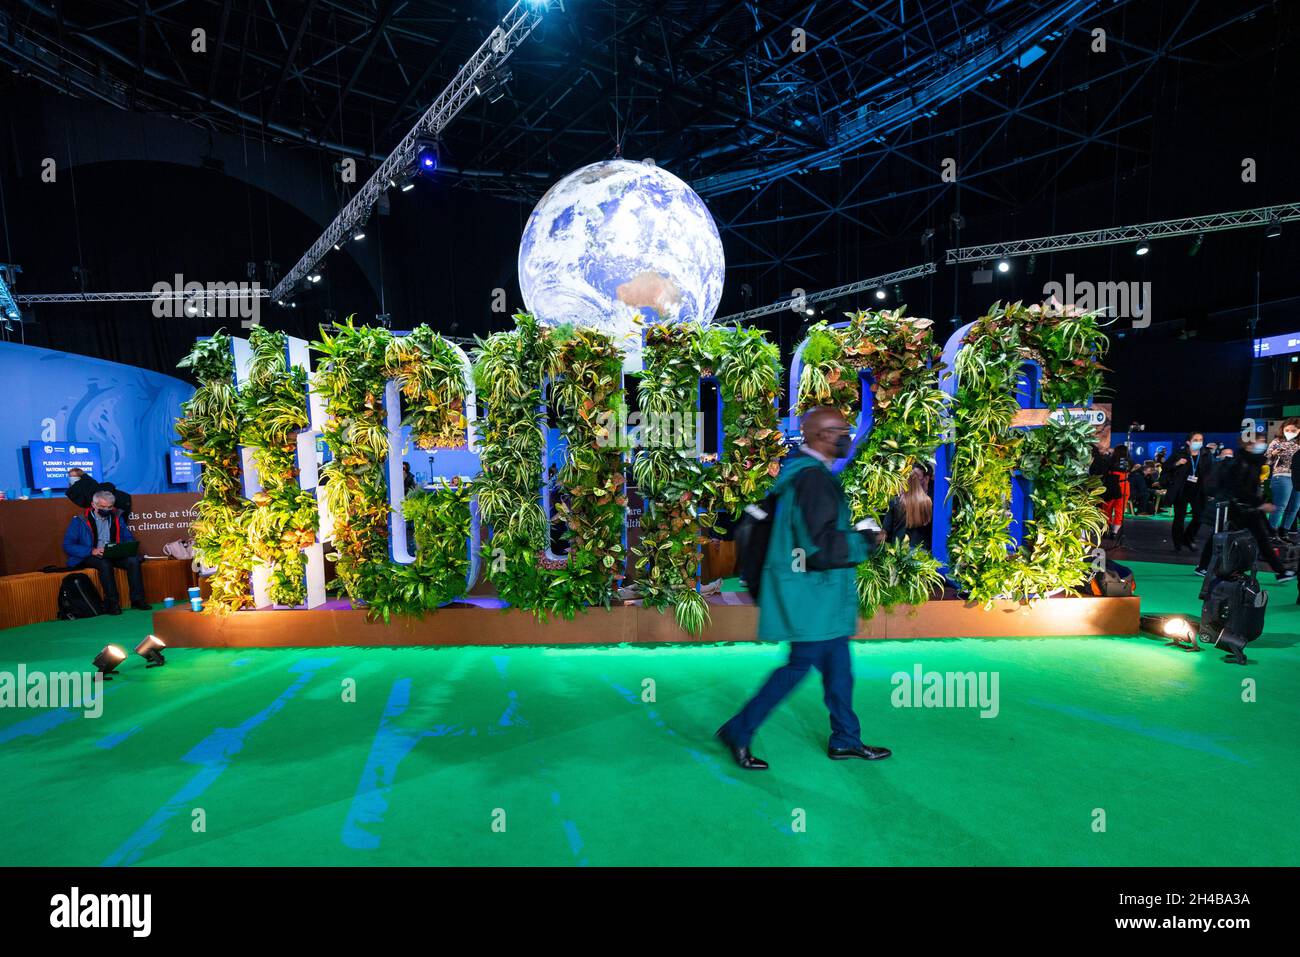 Glasgow, Scotland, UK. 1st November 2021. Images from Monday at the UN climate change conference in Glasgow. Pic; Interior of the COP26 venue . Iain Masterton/Alamy Live News. Stock Photo